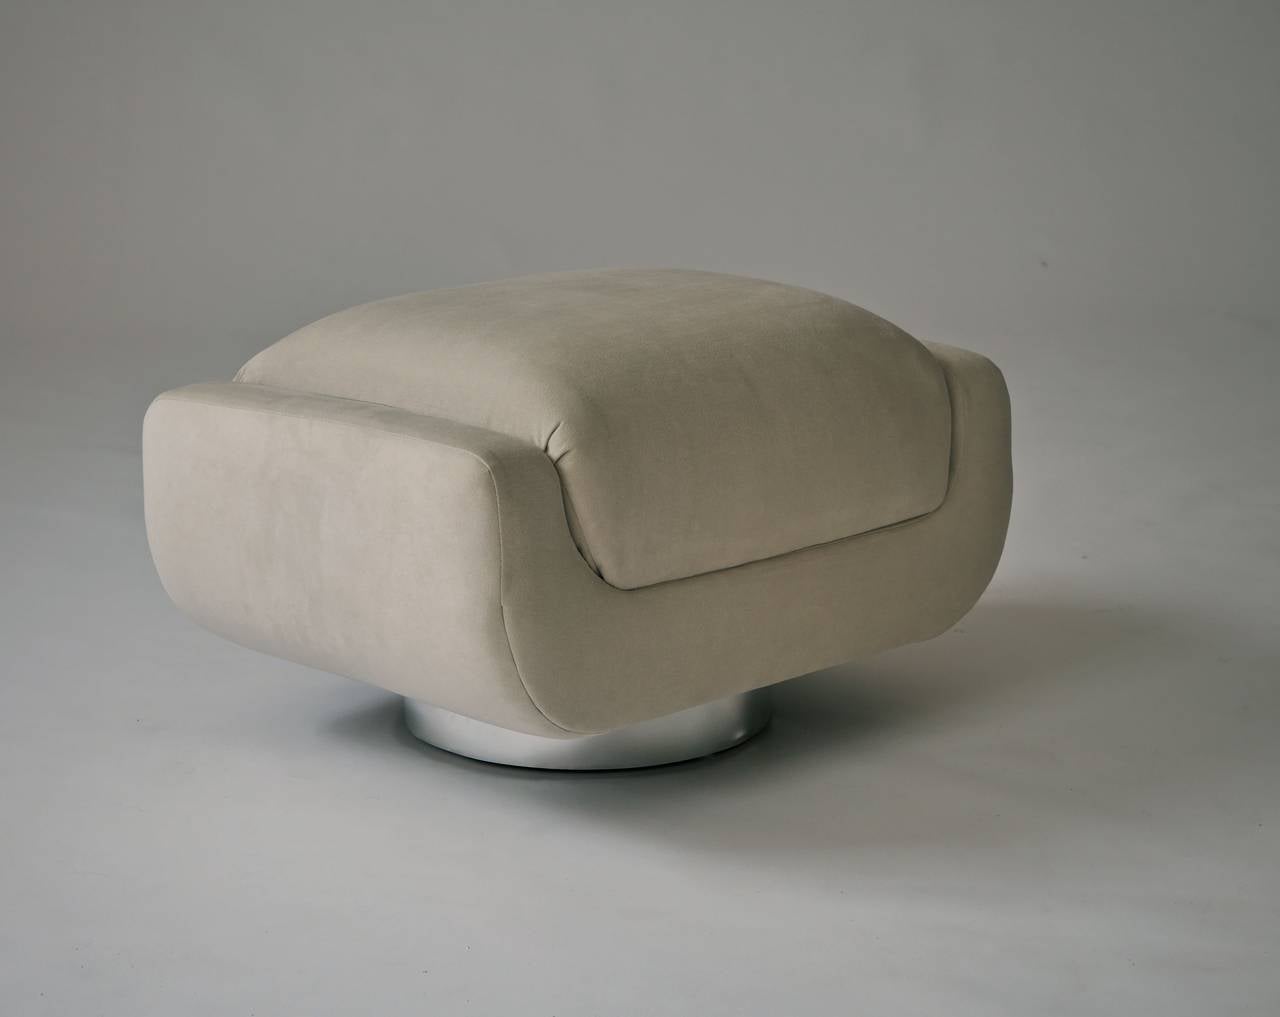 Beautifully reupholstered in bone colored ultrasuede Vladimir Kagan swivel lounge chair and ottoman for Directional.